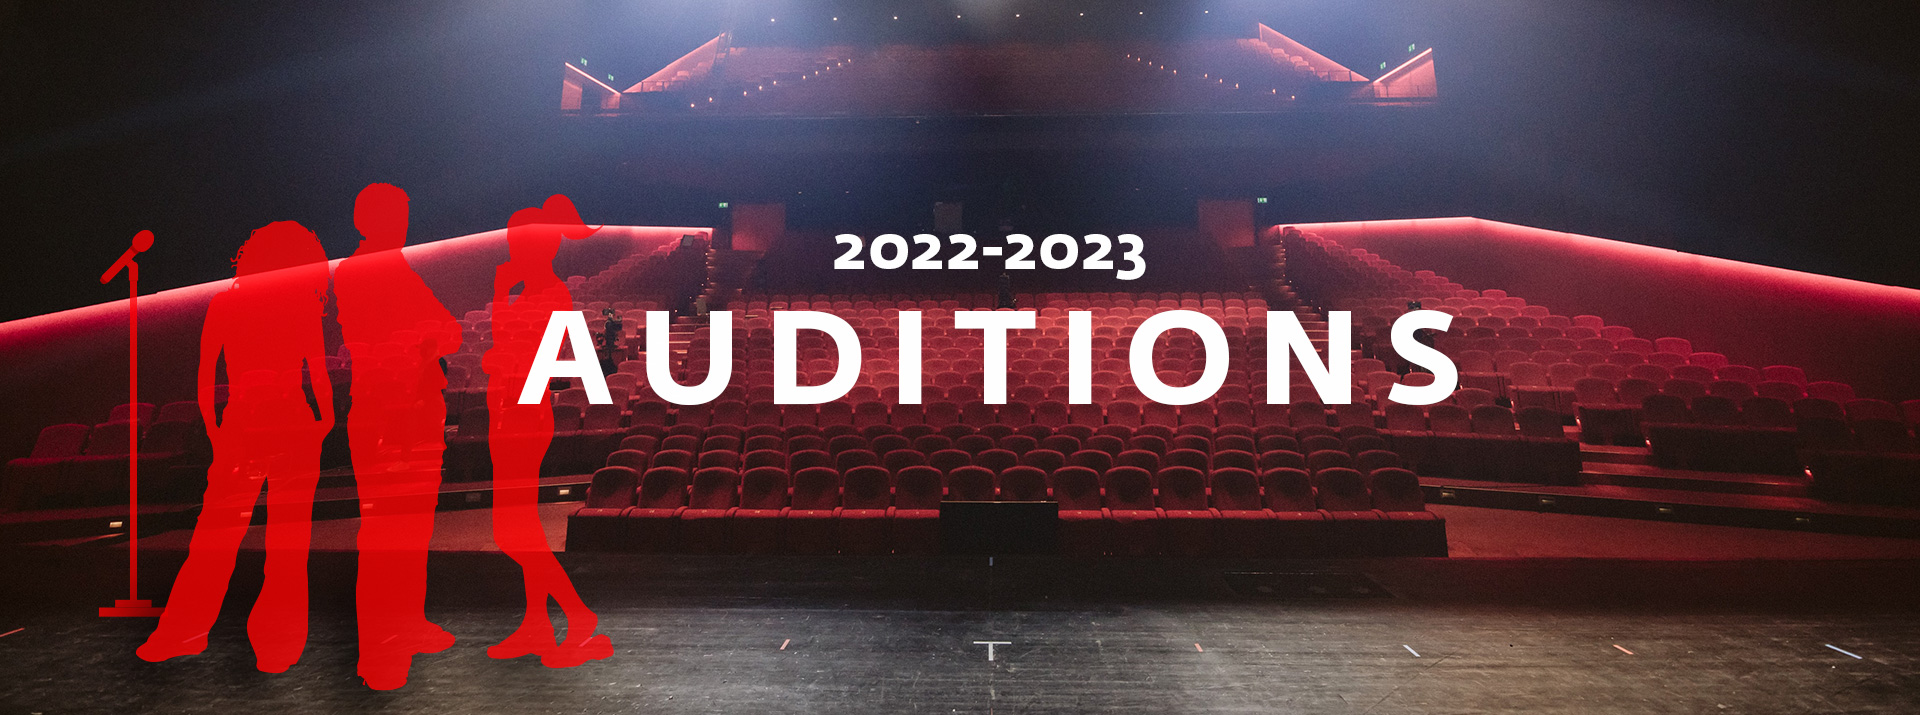 2022-2023 Auditions